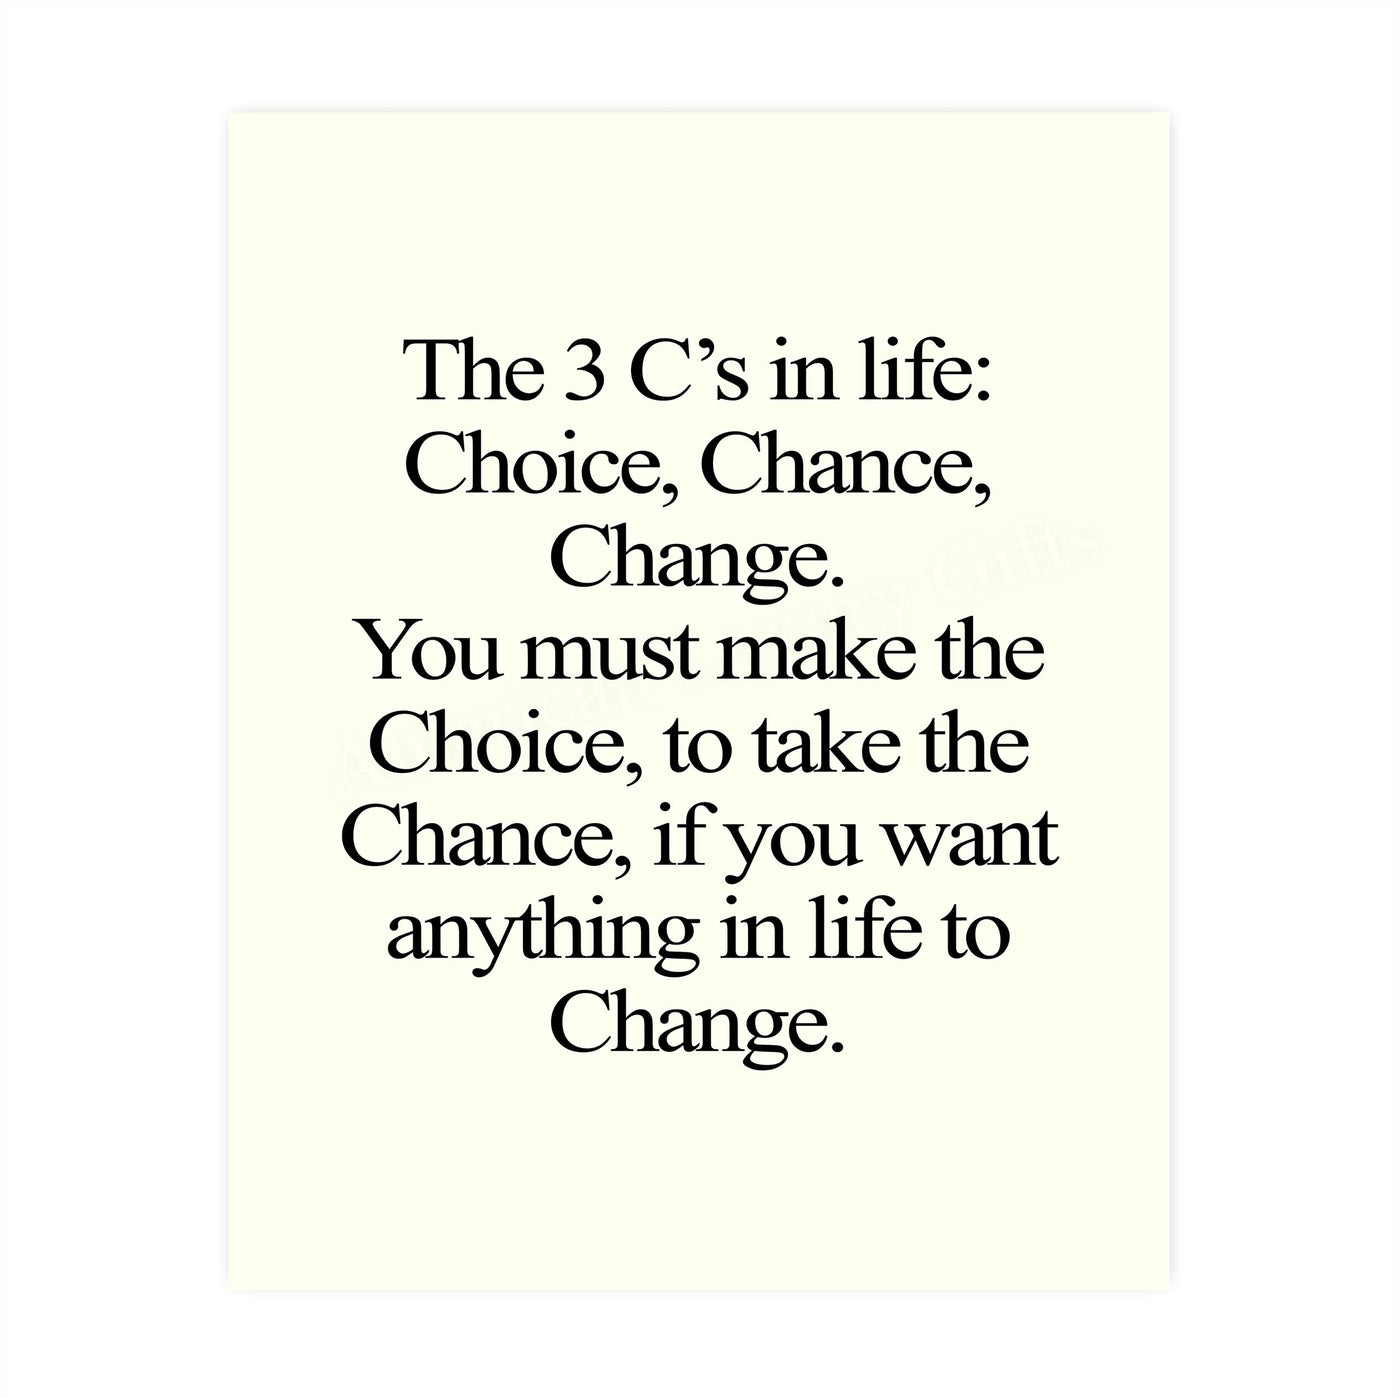 3 C's in Life: Choice, Chance, Change Motivational Quotes Wall Sign -8x10" Inspirational Art Print-Ready to Frame. Modern Decoration for Home-Office-Desk-School-Gym Decor. Great Gift of Motivation!